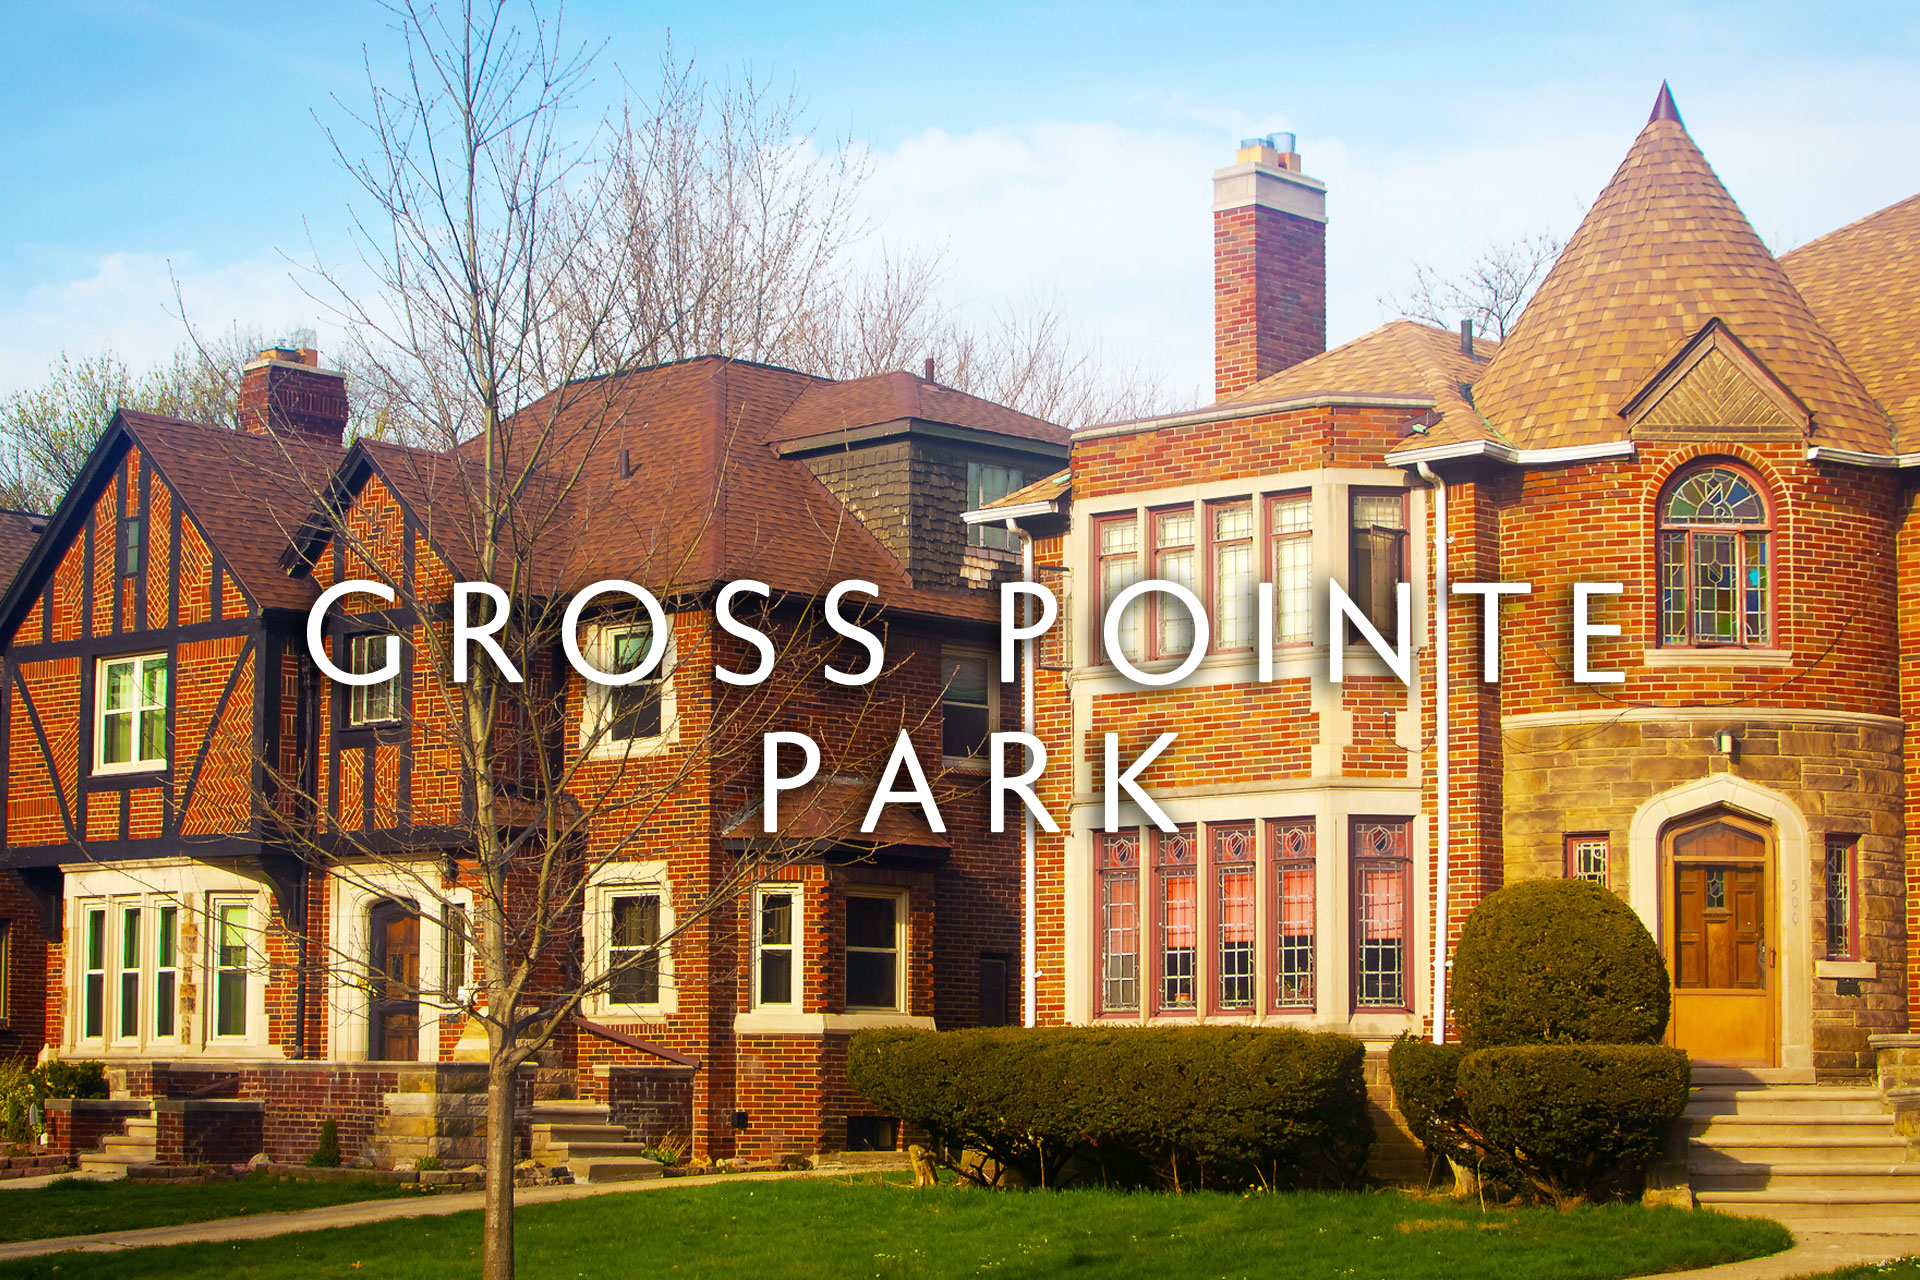 Gross Pointe Park brownstone home in Michigan